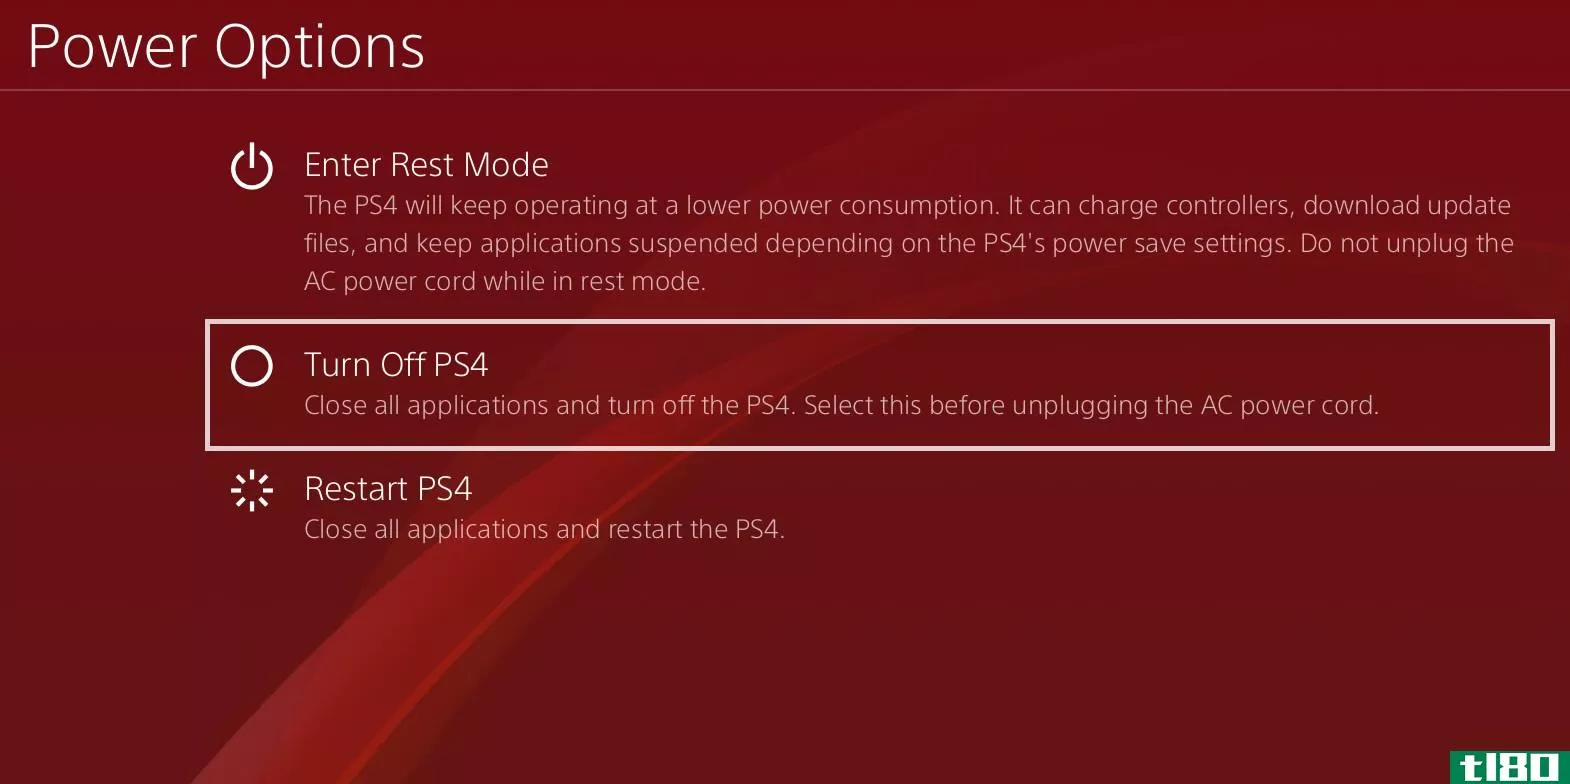 Turn a PS4 off using the Power menu